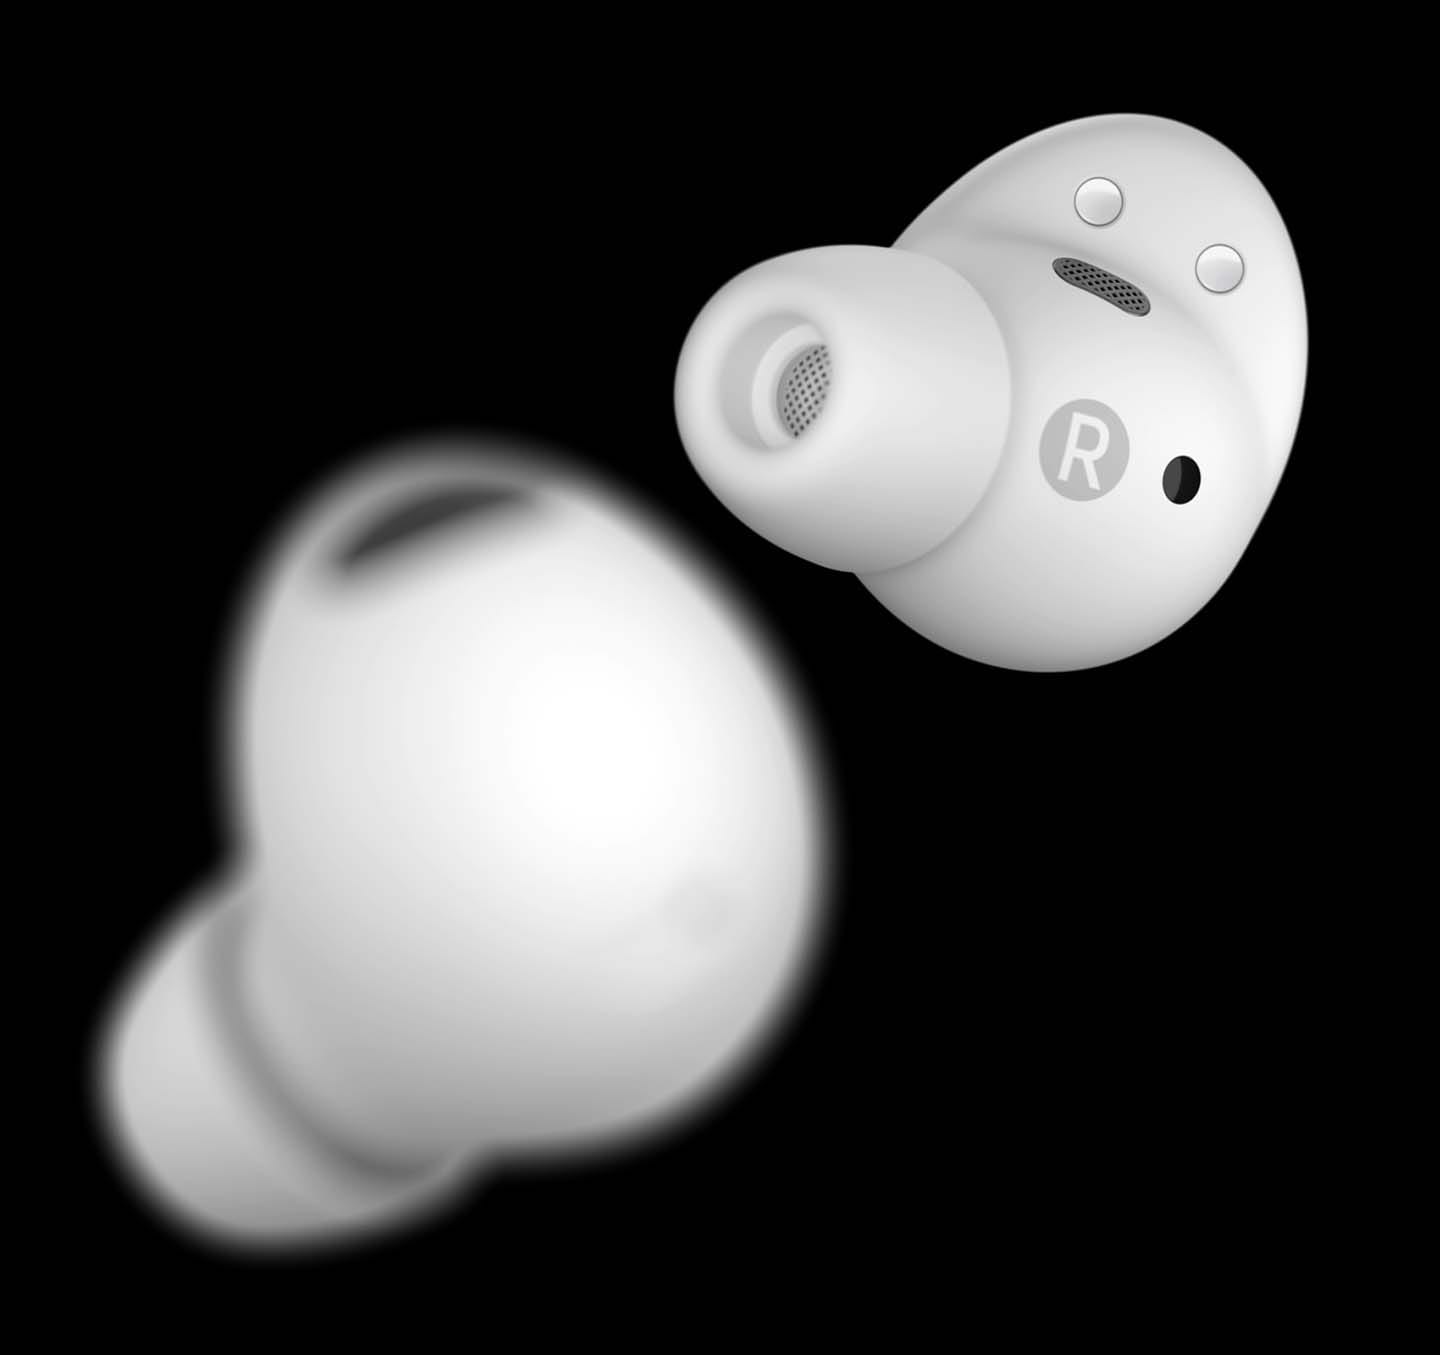 Two white Galaxy Buds2 Pro earbuds paced one in front of the other using a short depth of field. The left ear bud is placed closer and appears blurry. The right ear bud is farther away and appears clear.